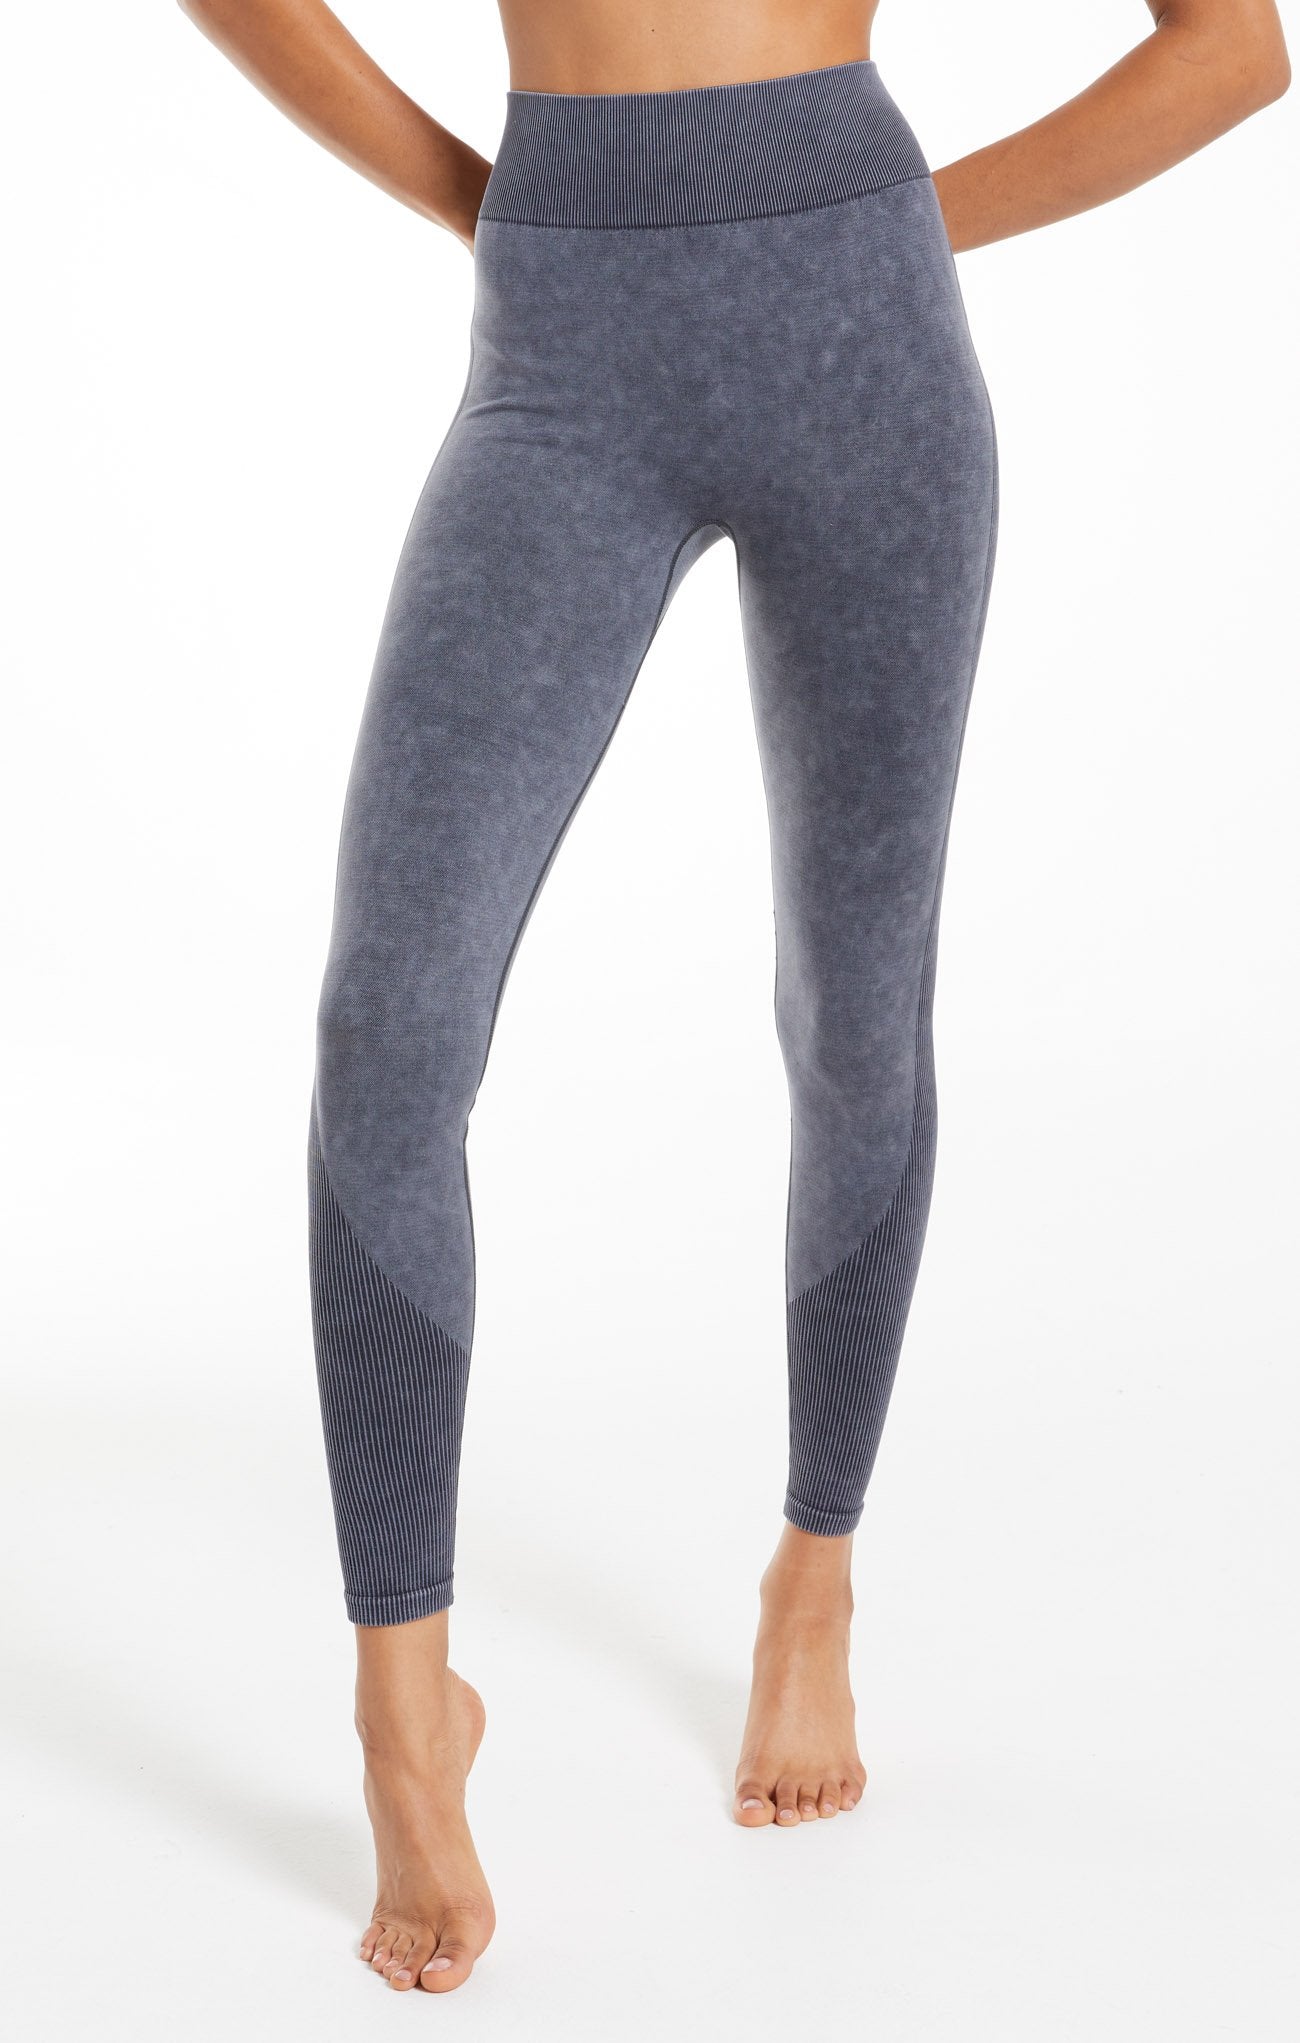 Z SUPPLY WALK IT OUT SEAMLESS LEGGINGS – South Coast Surf Shops Online